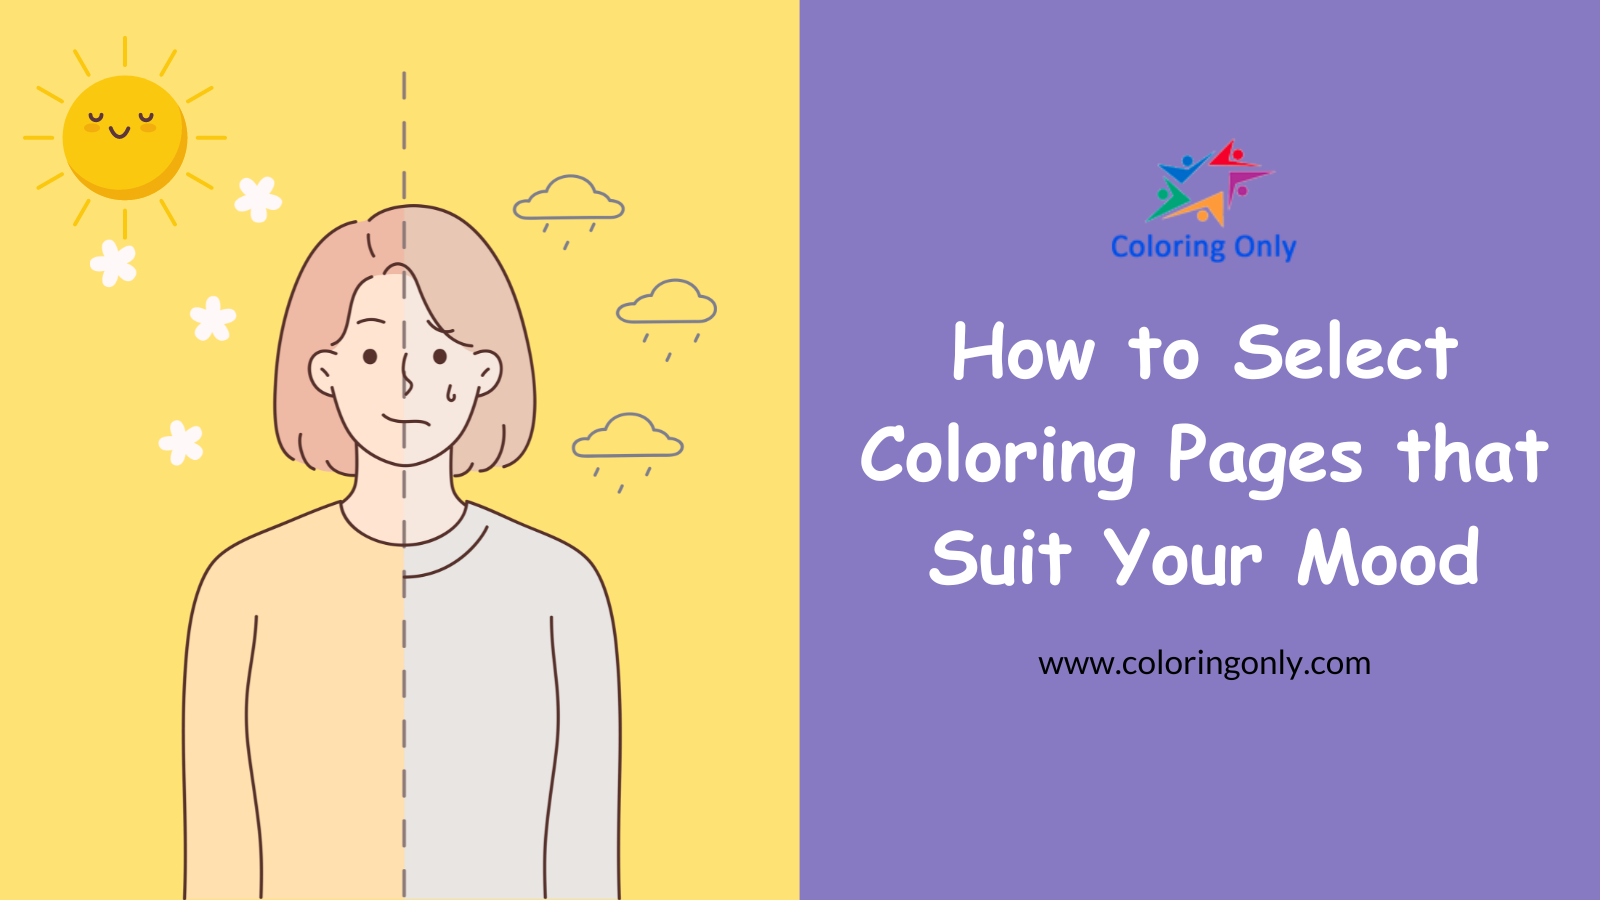 How to Select Coloring Pages that Suit Your Mood